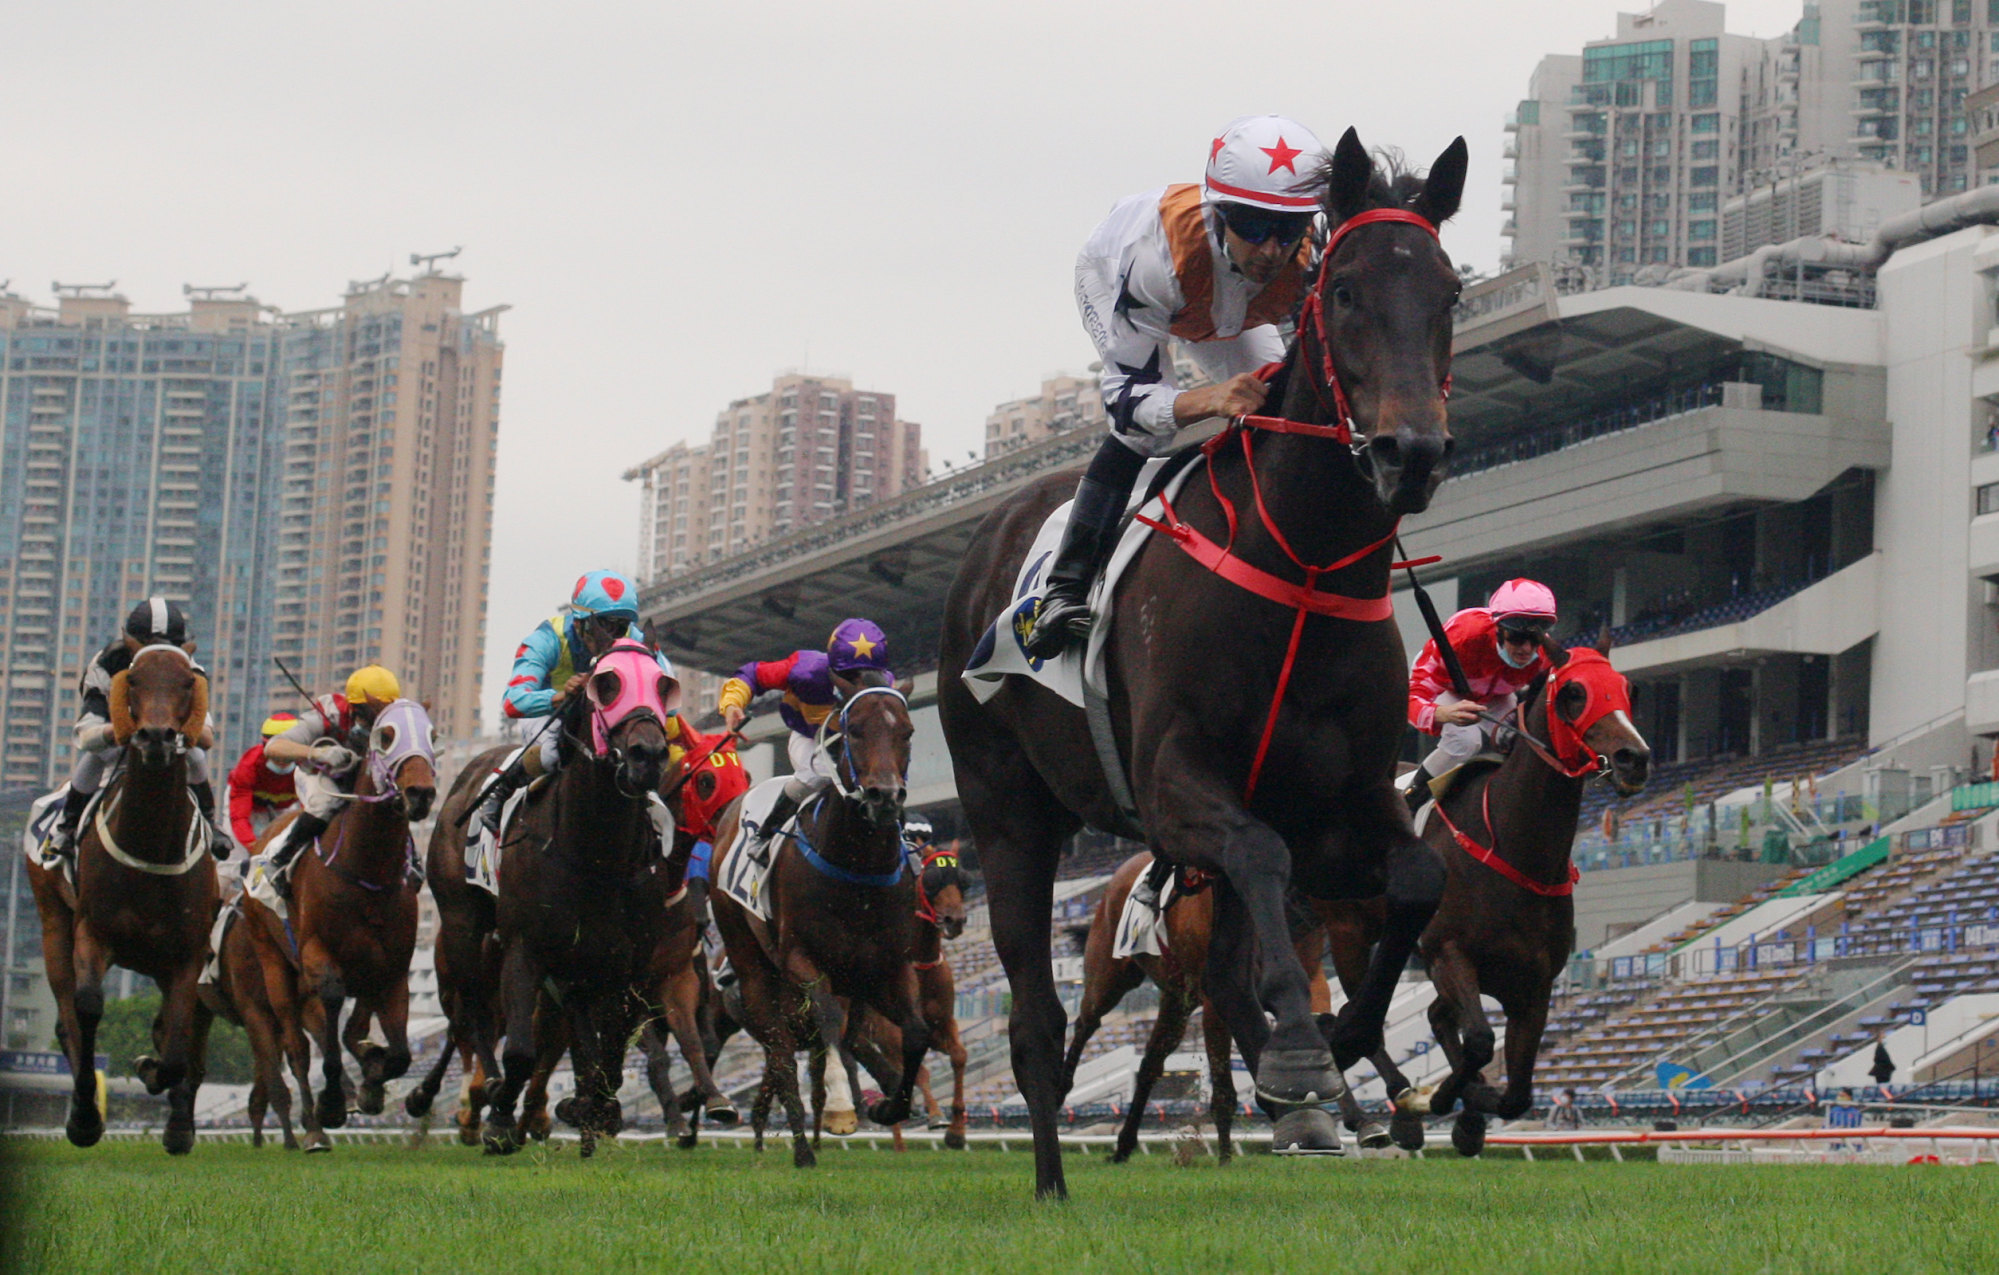 Joao Moreira sits quietly as Courier Wonder coasts to victory at Sha Tin.